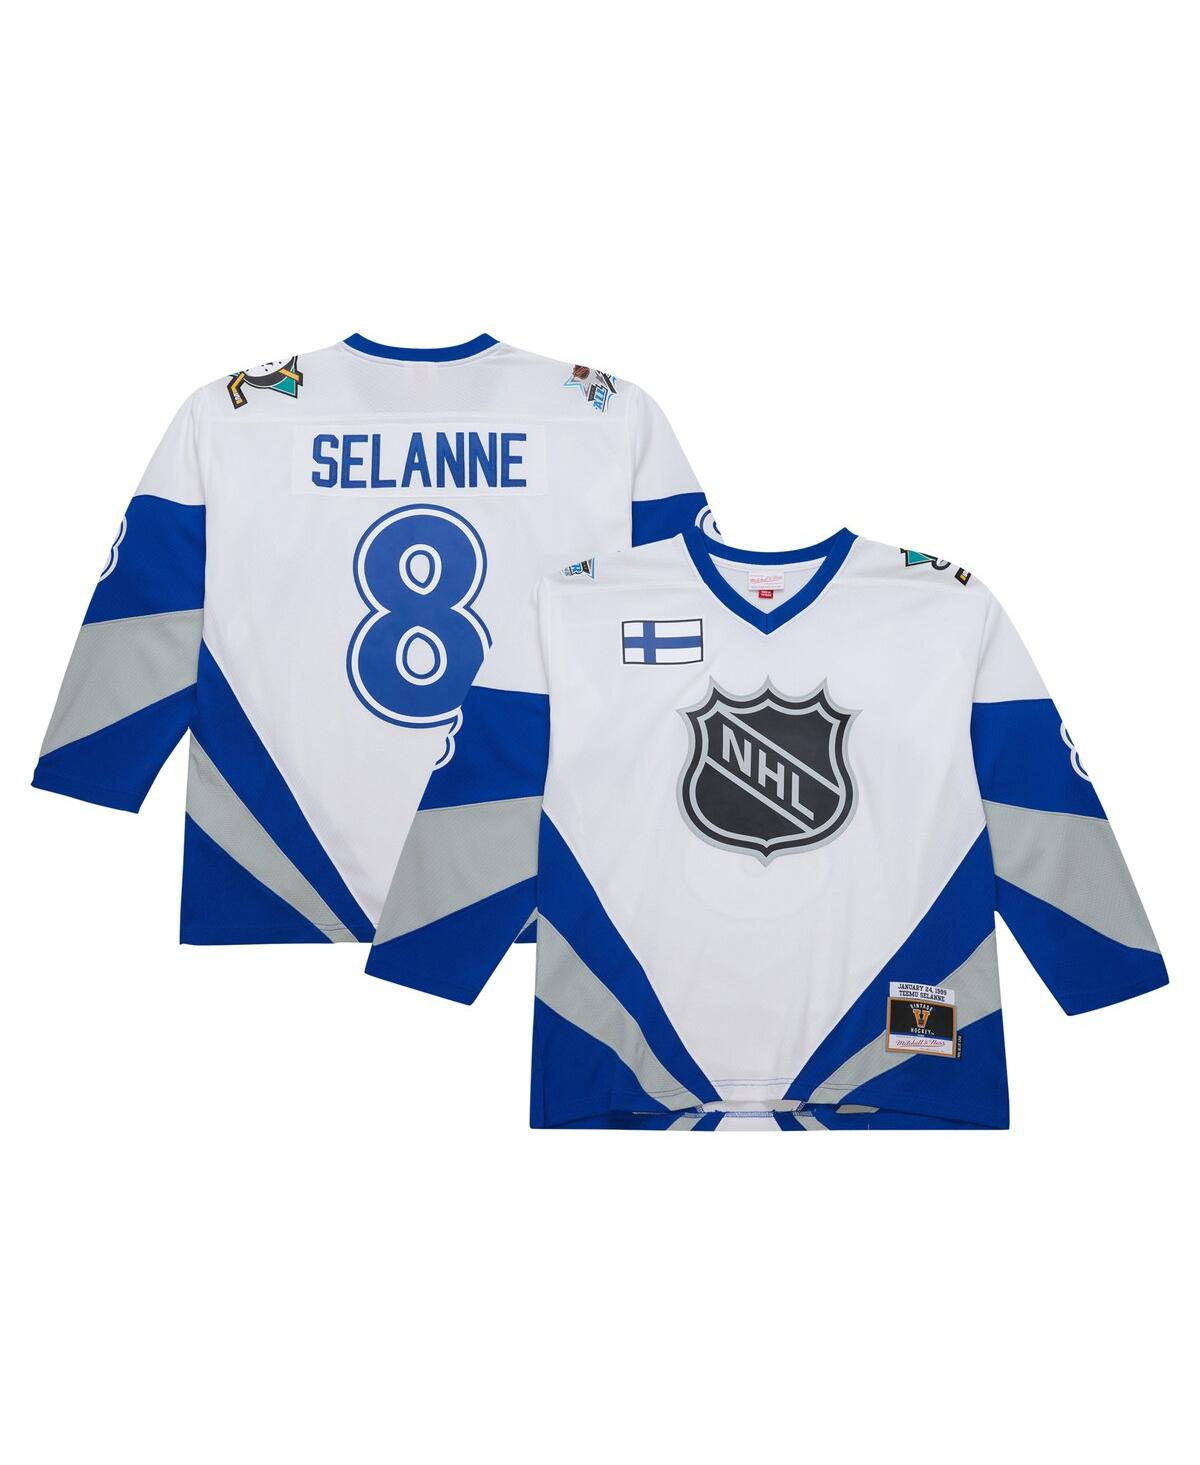 Mitchell Ness Men's Teemu Selanne White 1999 Nhl All-Star Game Blue Line Player Jersey - White